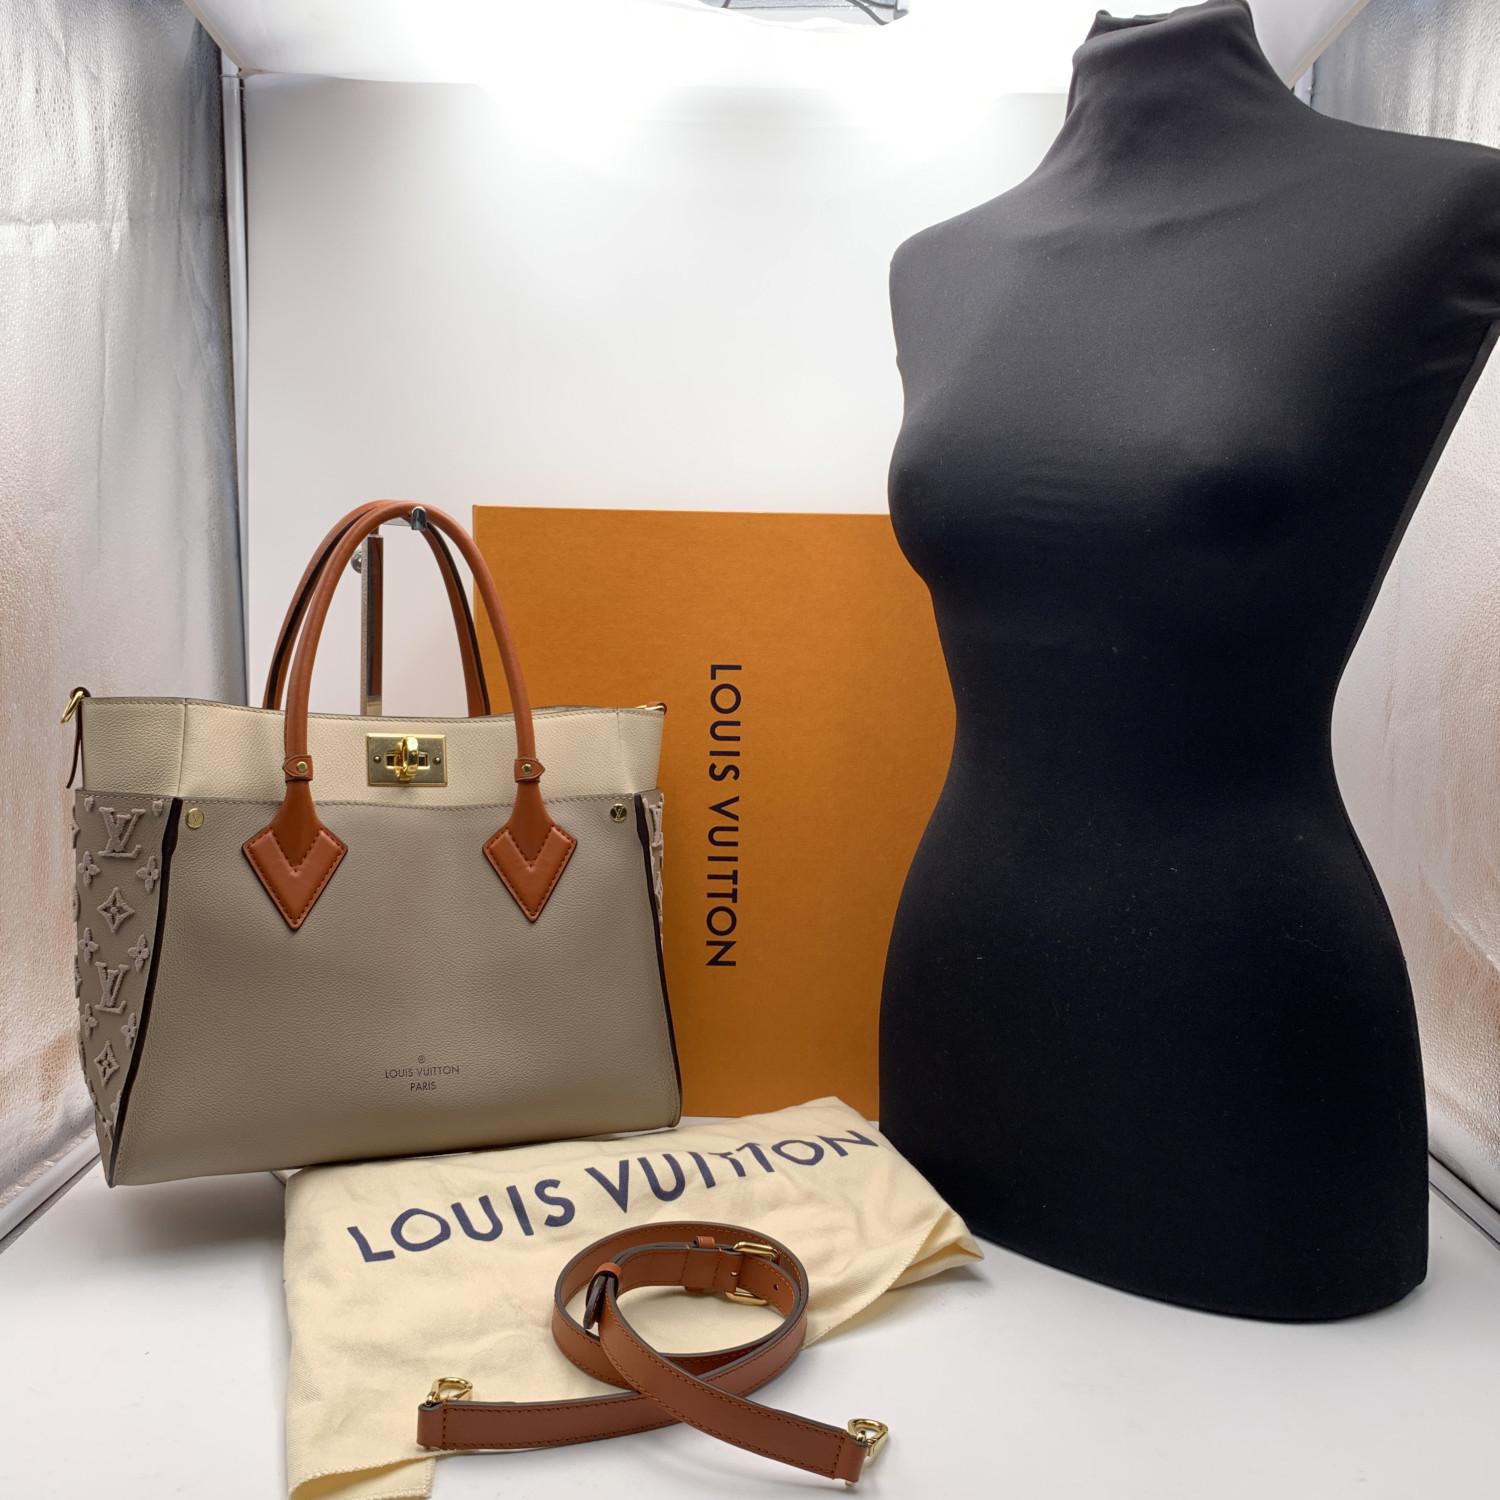 This beautiful Bag will come with a Certificate of Authenticity provided by Entrupy. The certificate will be provided at no further cost

Louis Vuitton 'On my Side' Tote Bag, crafted in beige and taupe leather with embossed monogram pattern on the